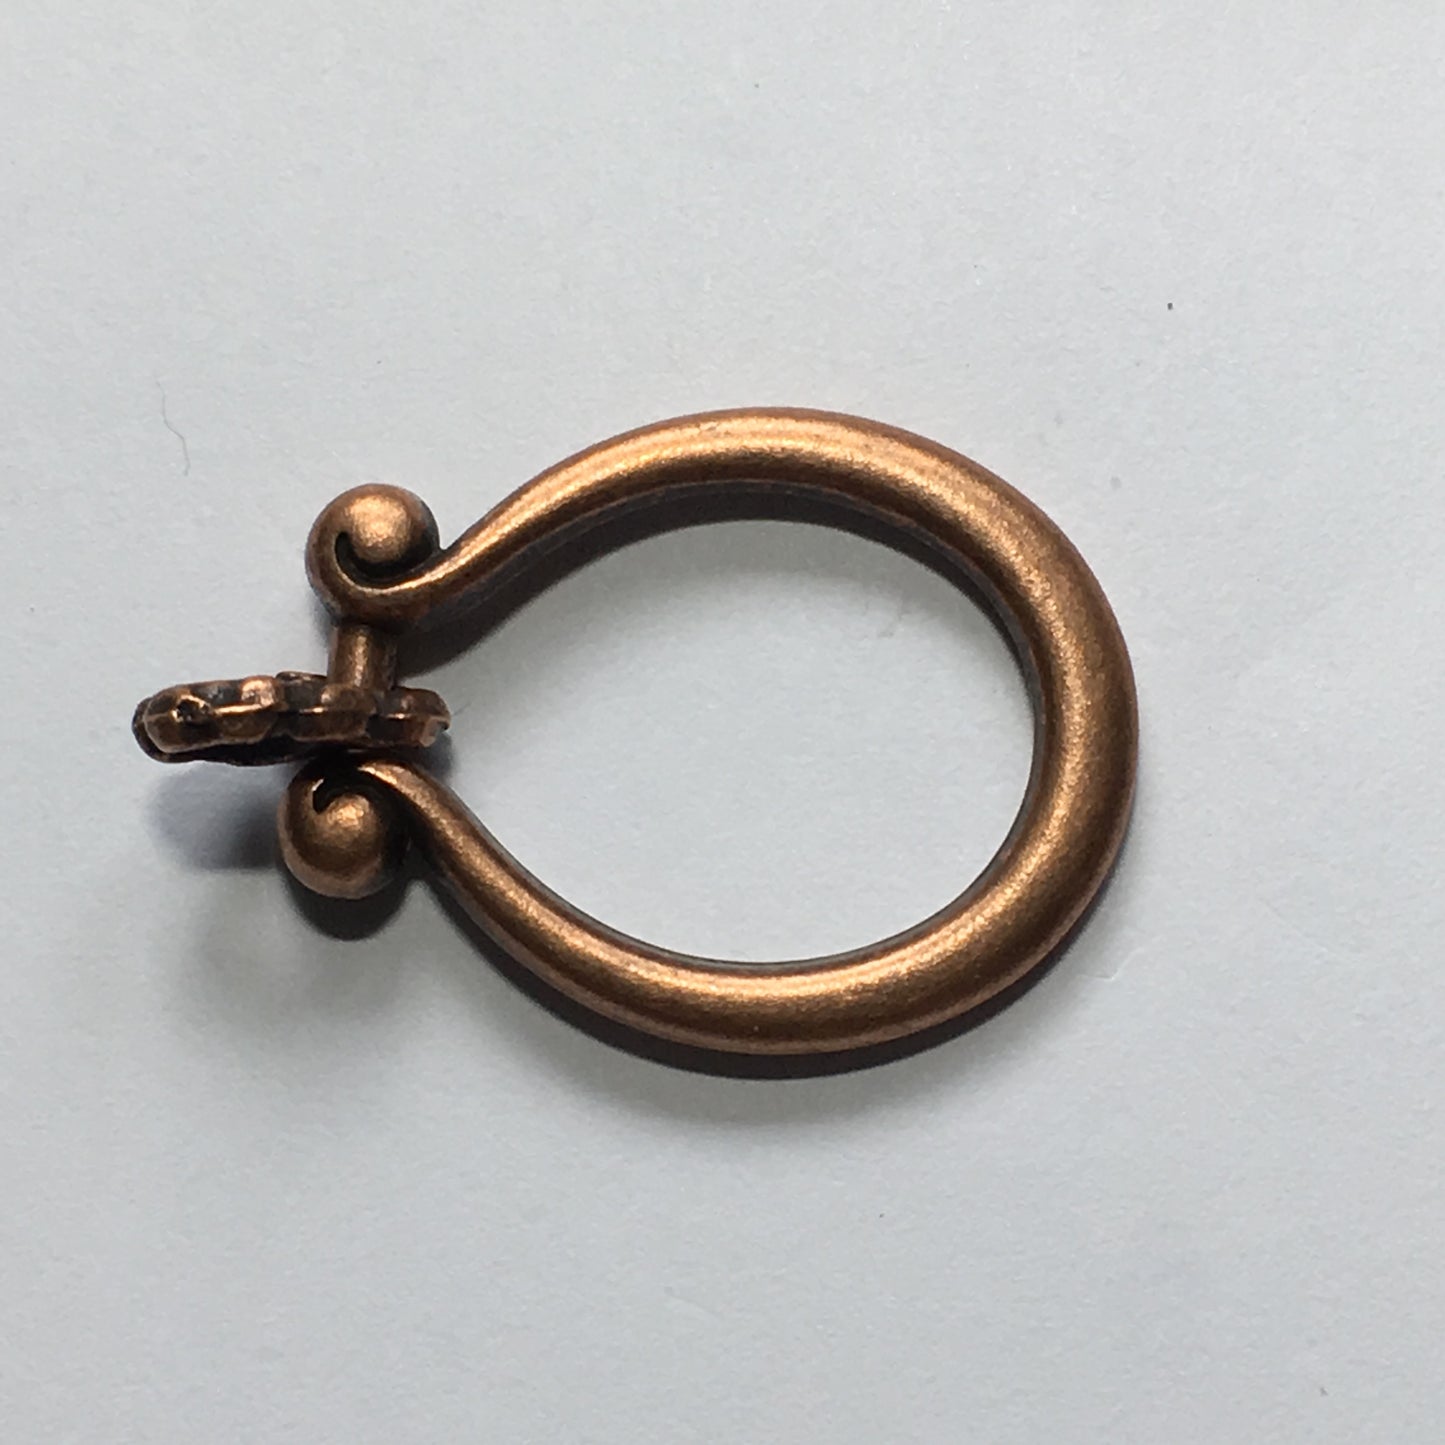 Copper Horseshoe Loop Clasp 25 x 20 mm, Connector 10 x 5 mm - Hook Not Included